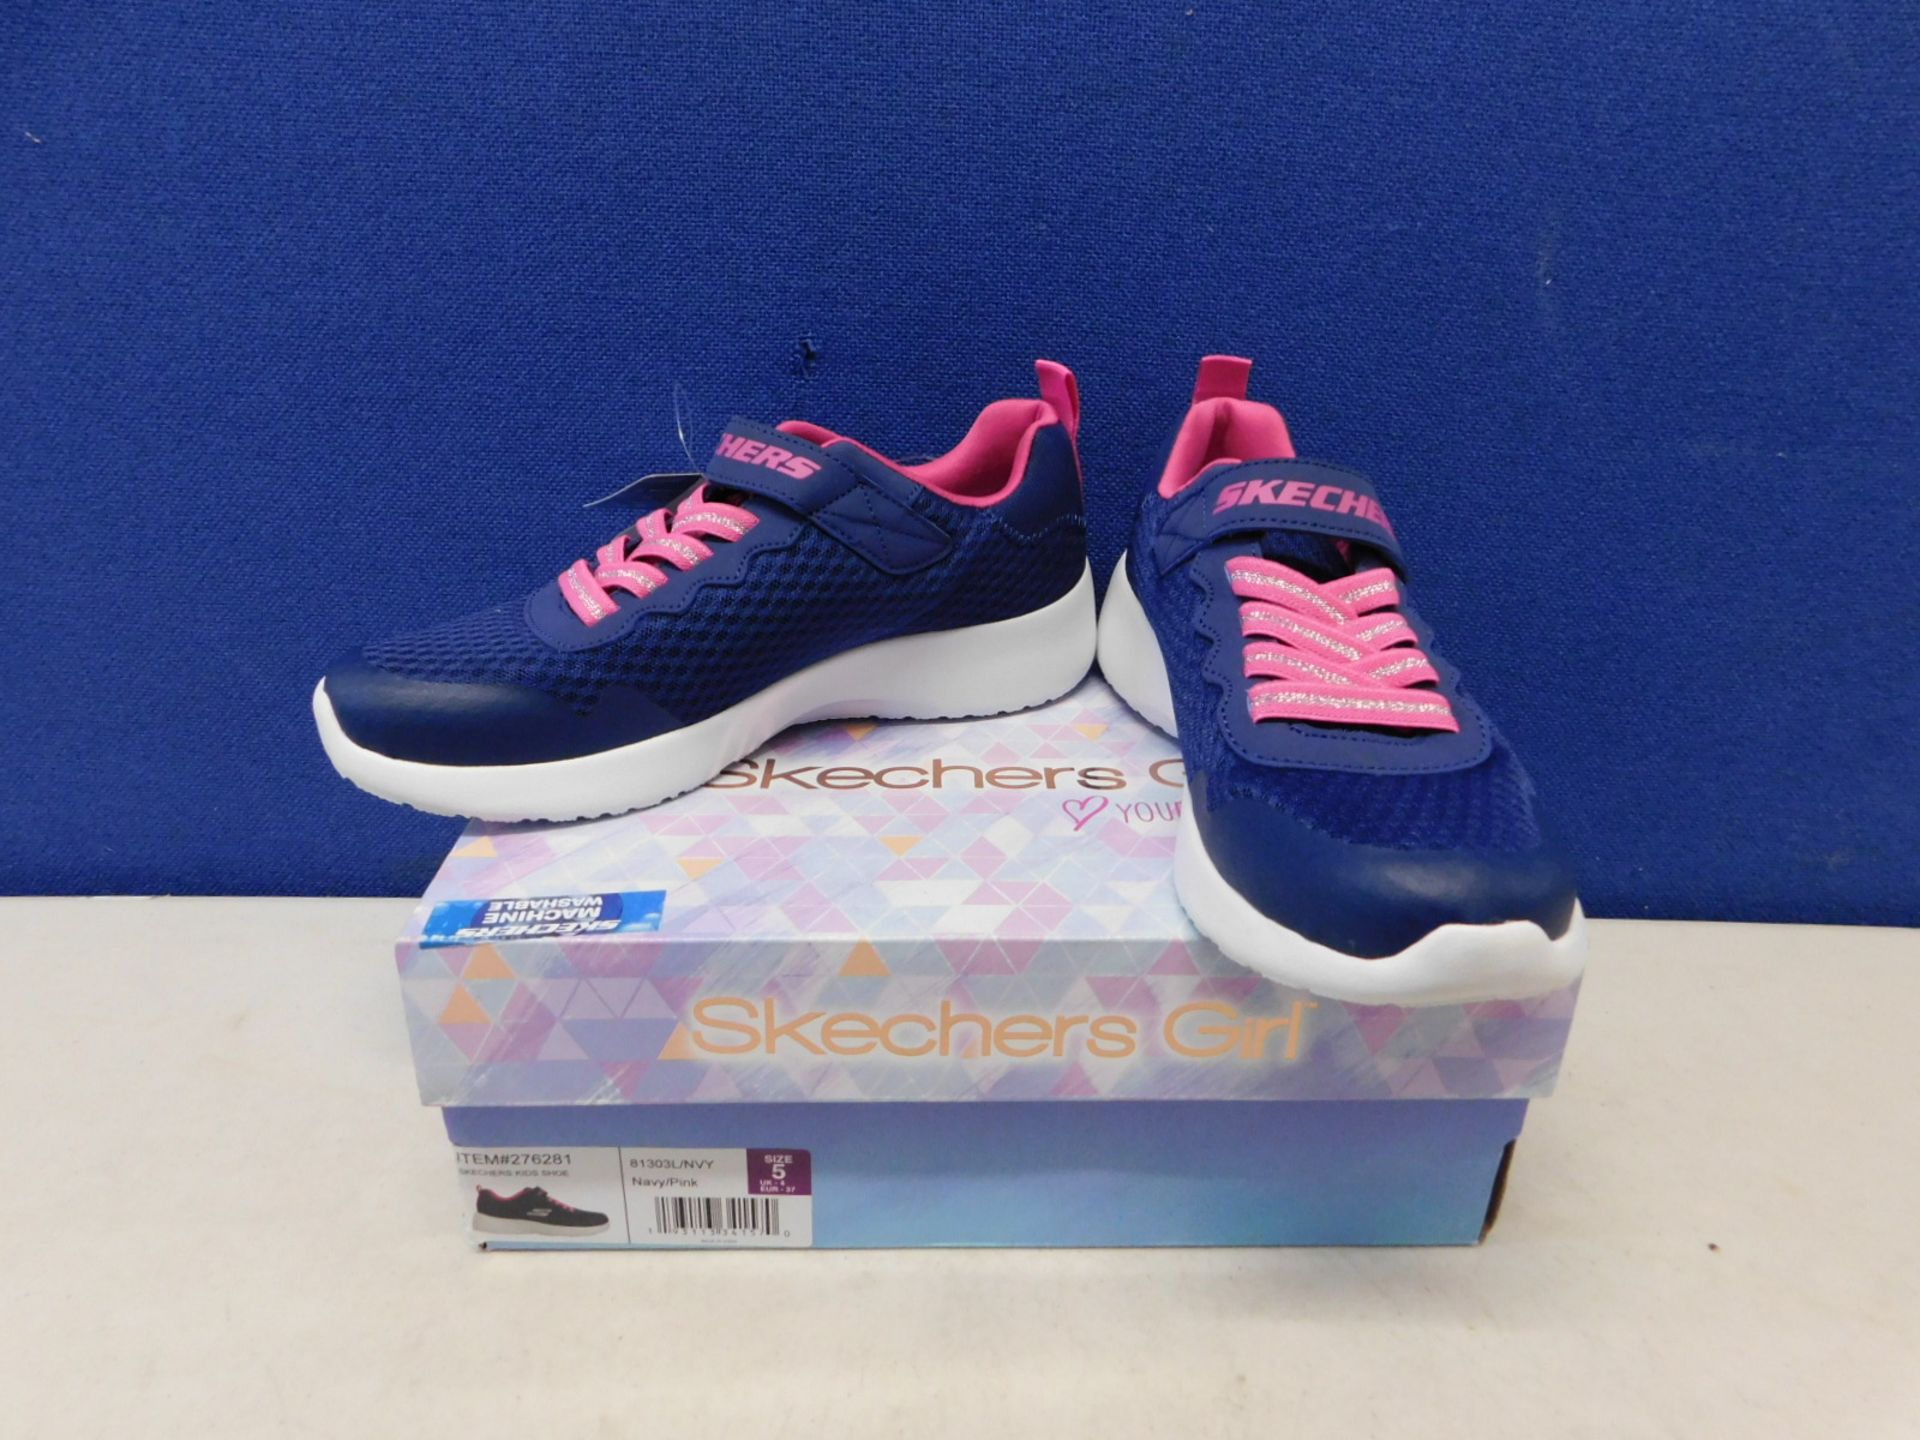 1 BOXED SKECHERS KIDS SHOES NAVY/PINK (UK SIZE 4) RRP Â£59.99